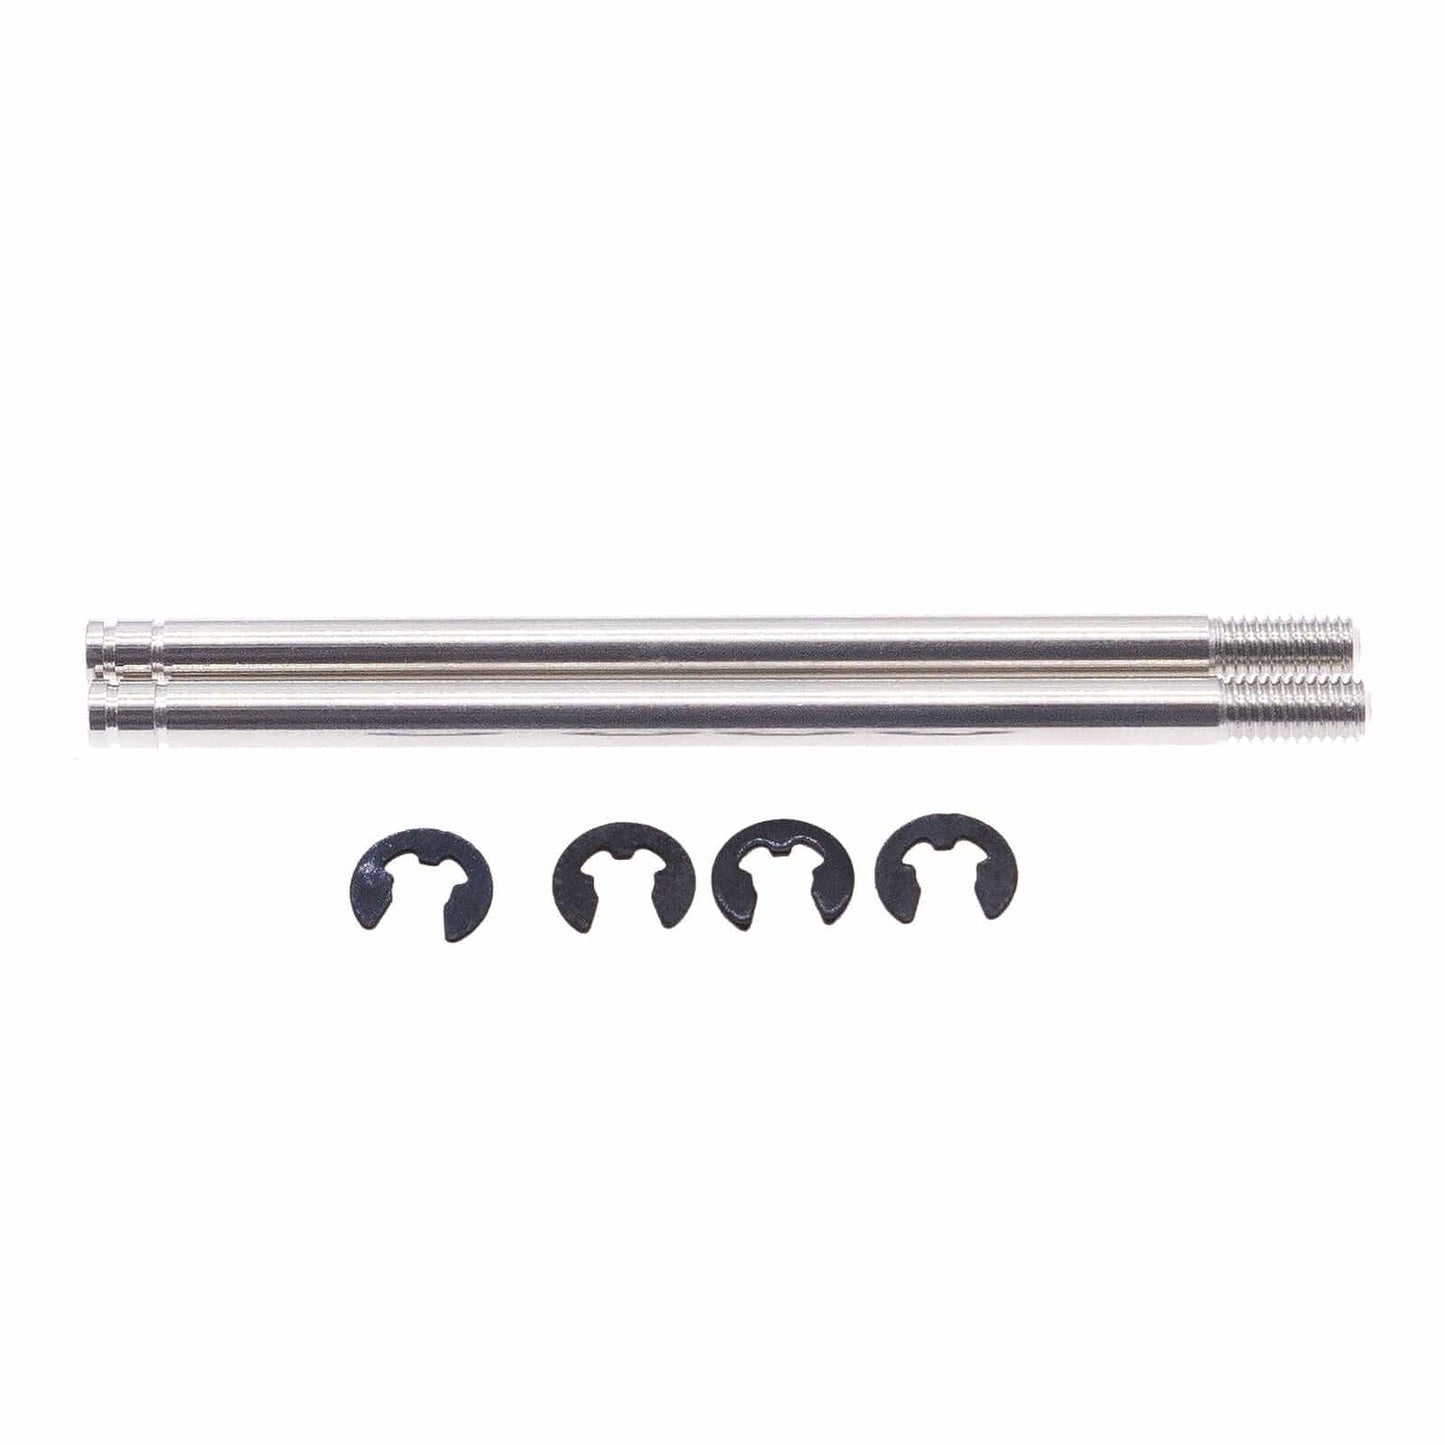 RCAWD ECX UPGRADE PARTS RCAWD rear shock absorber shaft for 1/10 ECX 2WD series